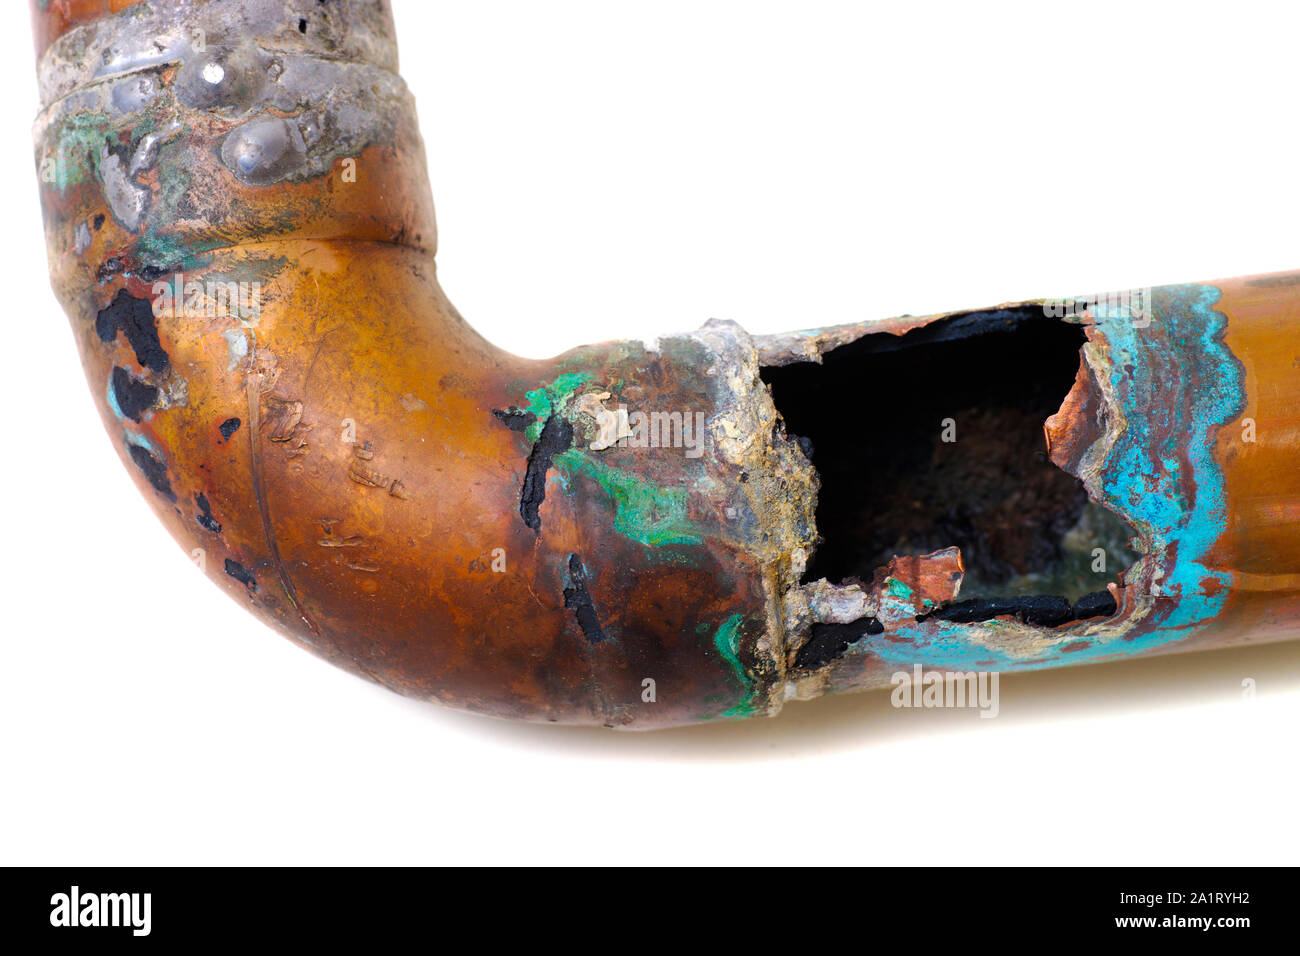 Bathroom Sink Copper Water Drain Line Badly Corroded After 50 Years Of Use